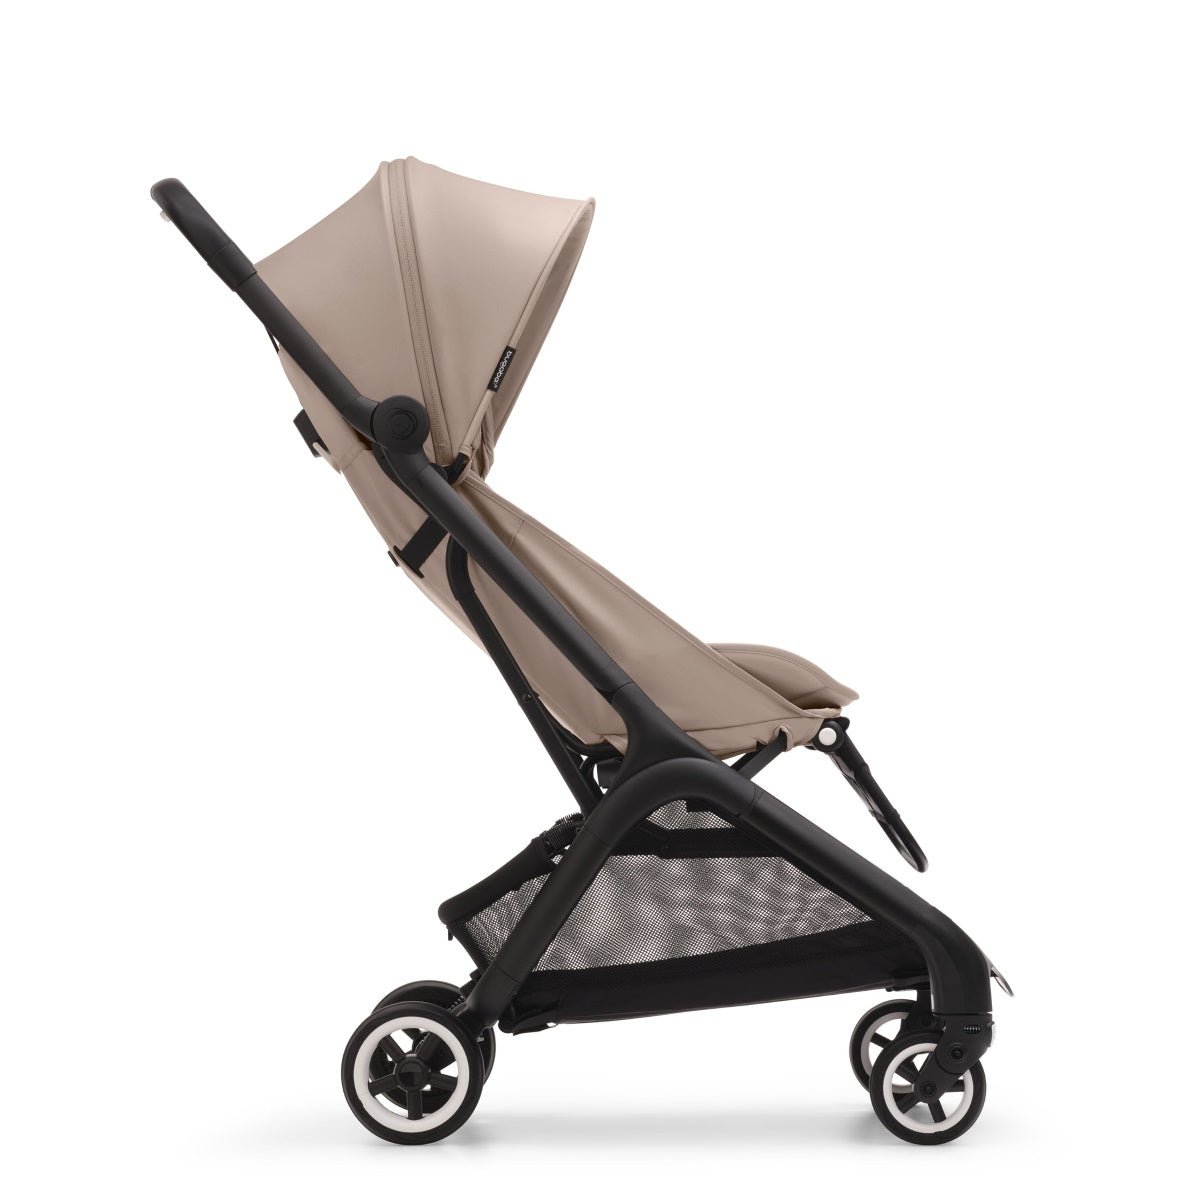 Bugaboo Butterfly Complete Stroller - ANB Baby -100025034$300 - $500